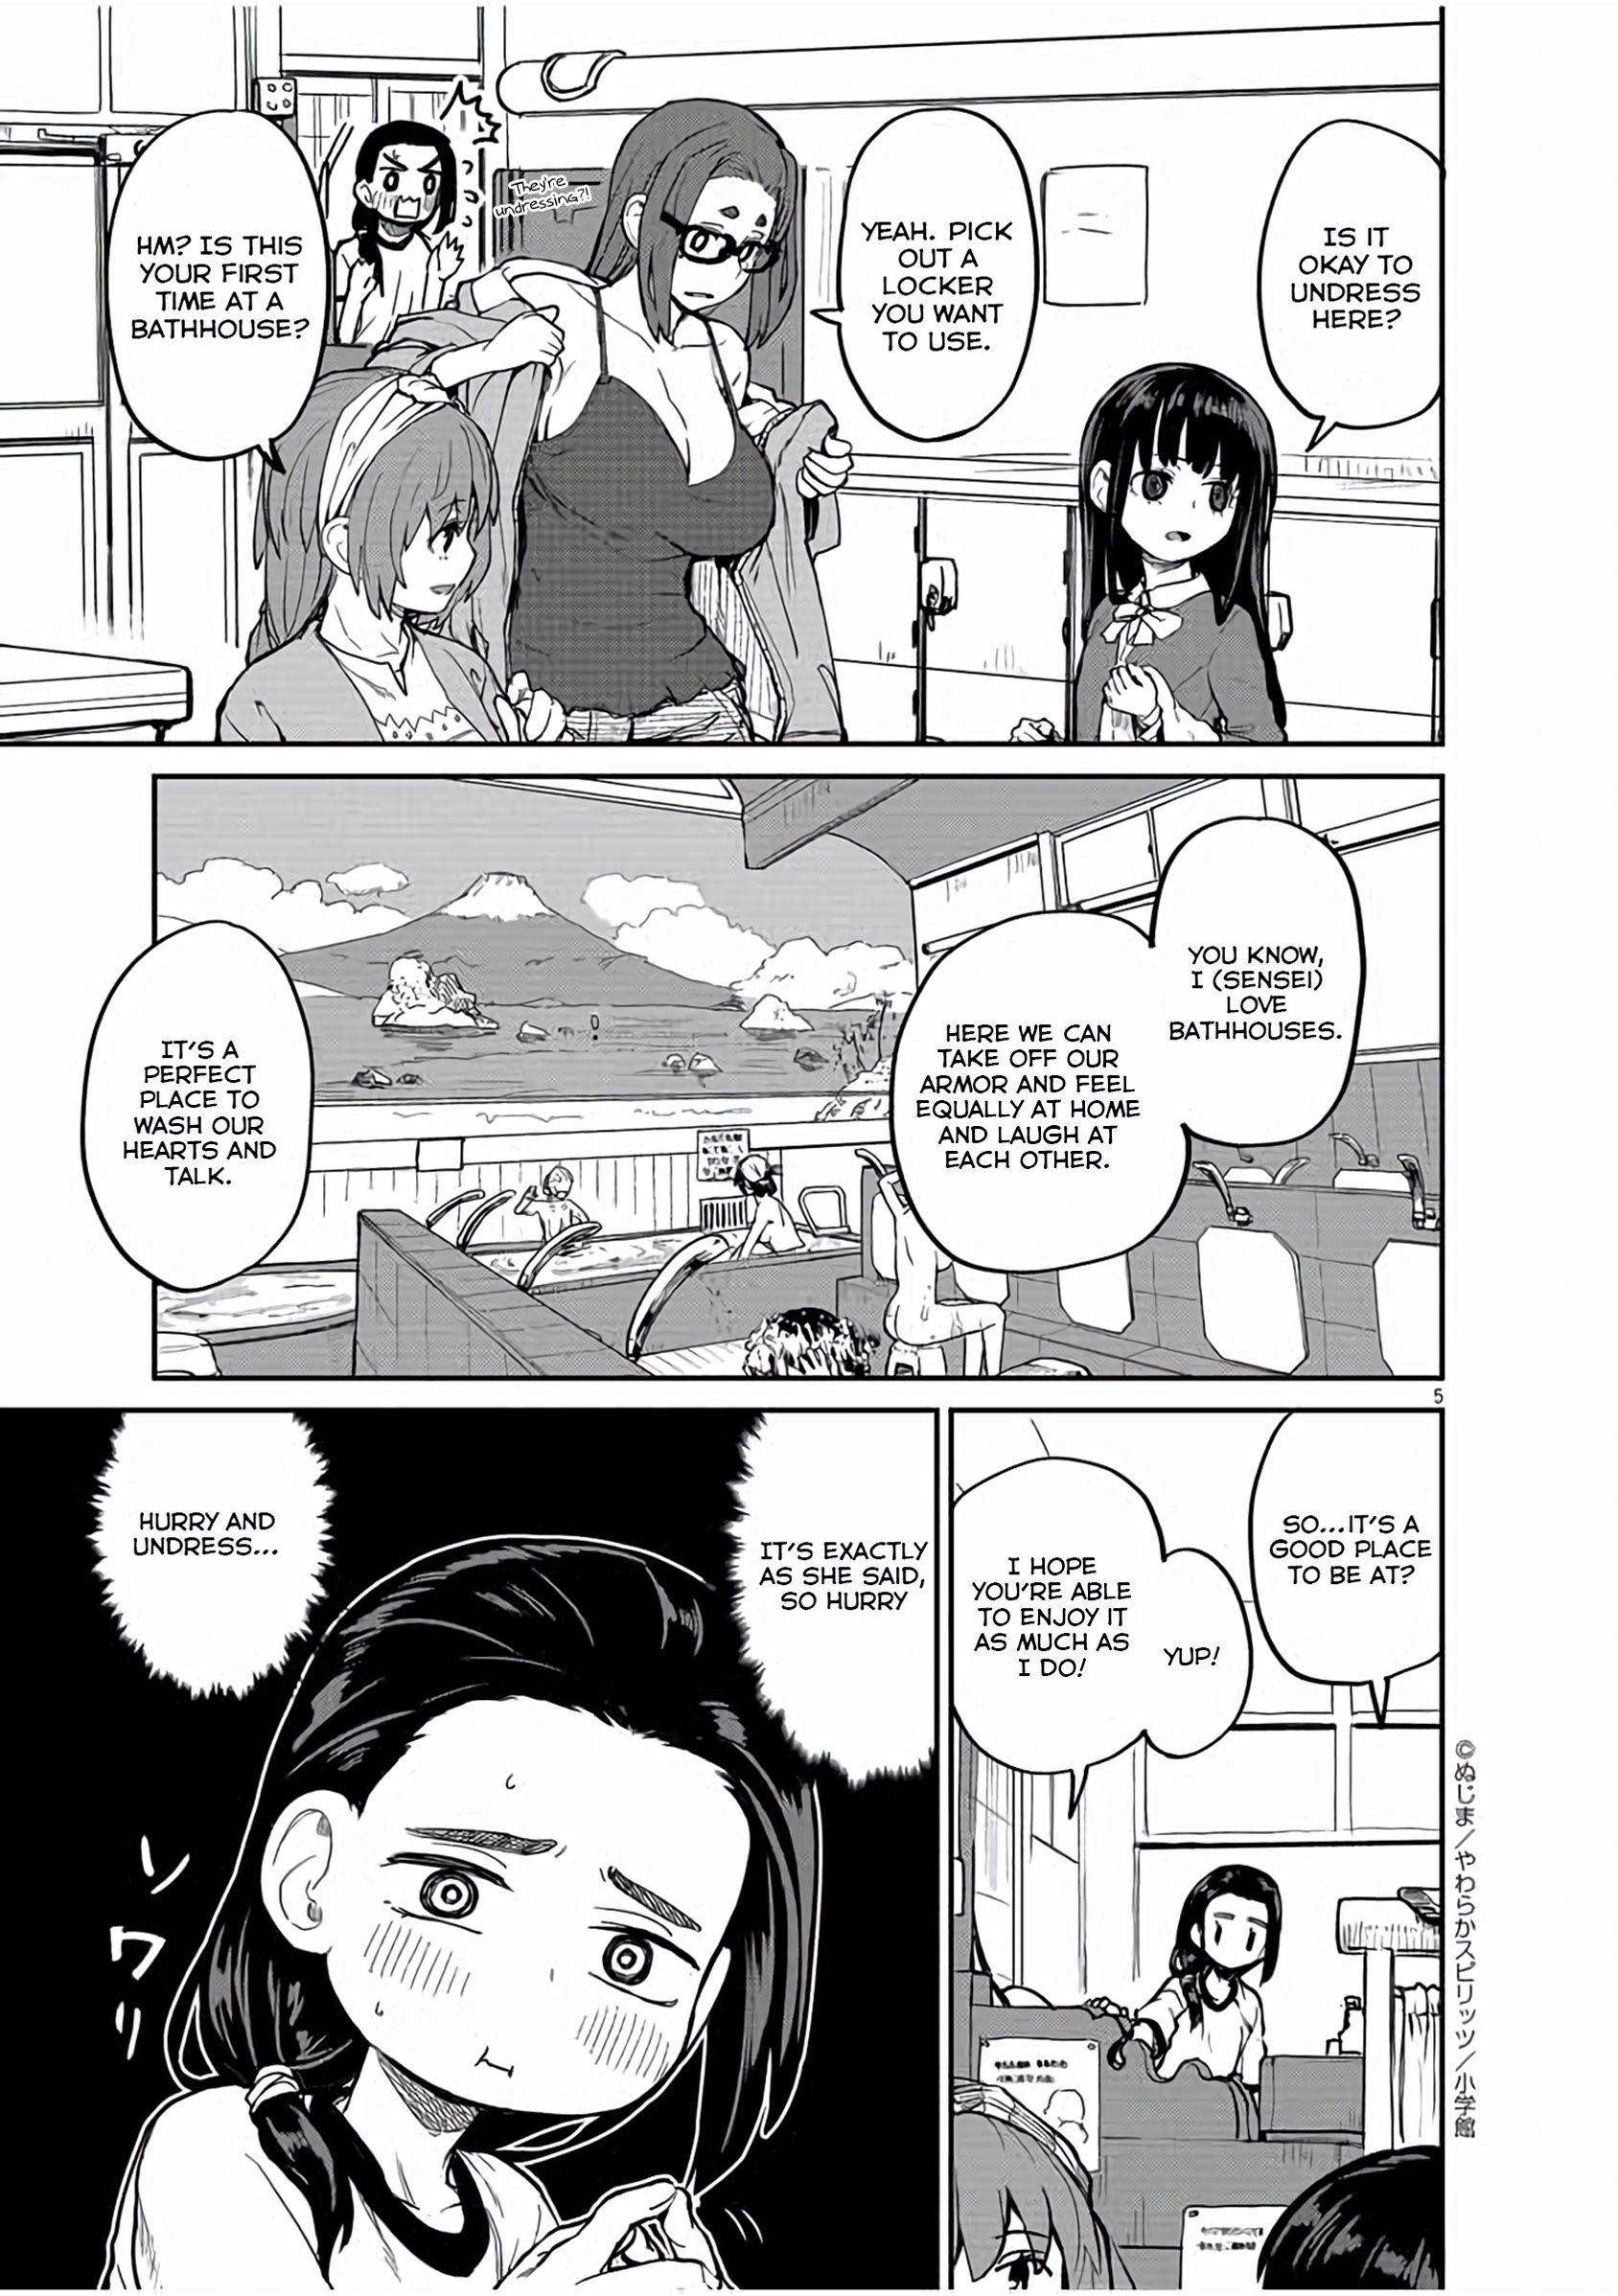 Mysteries, Maidens, And Mysterious Disappearances - chapter 15 - #6